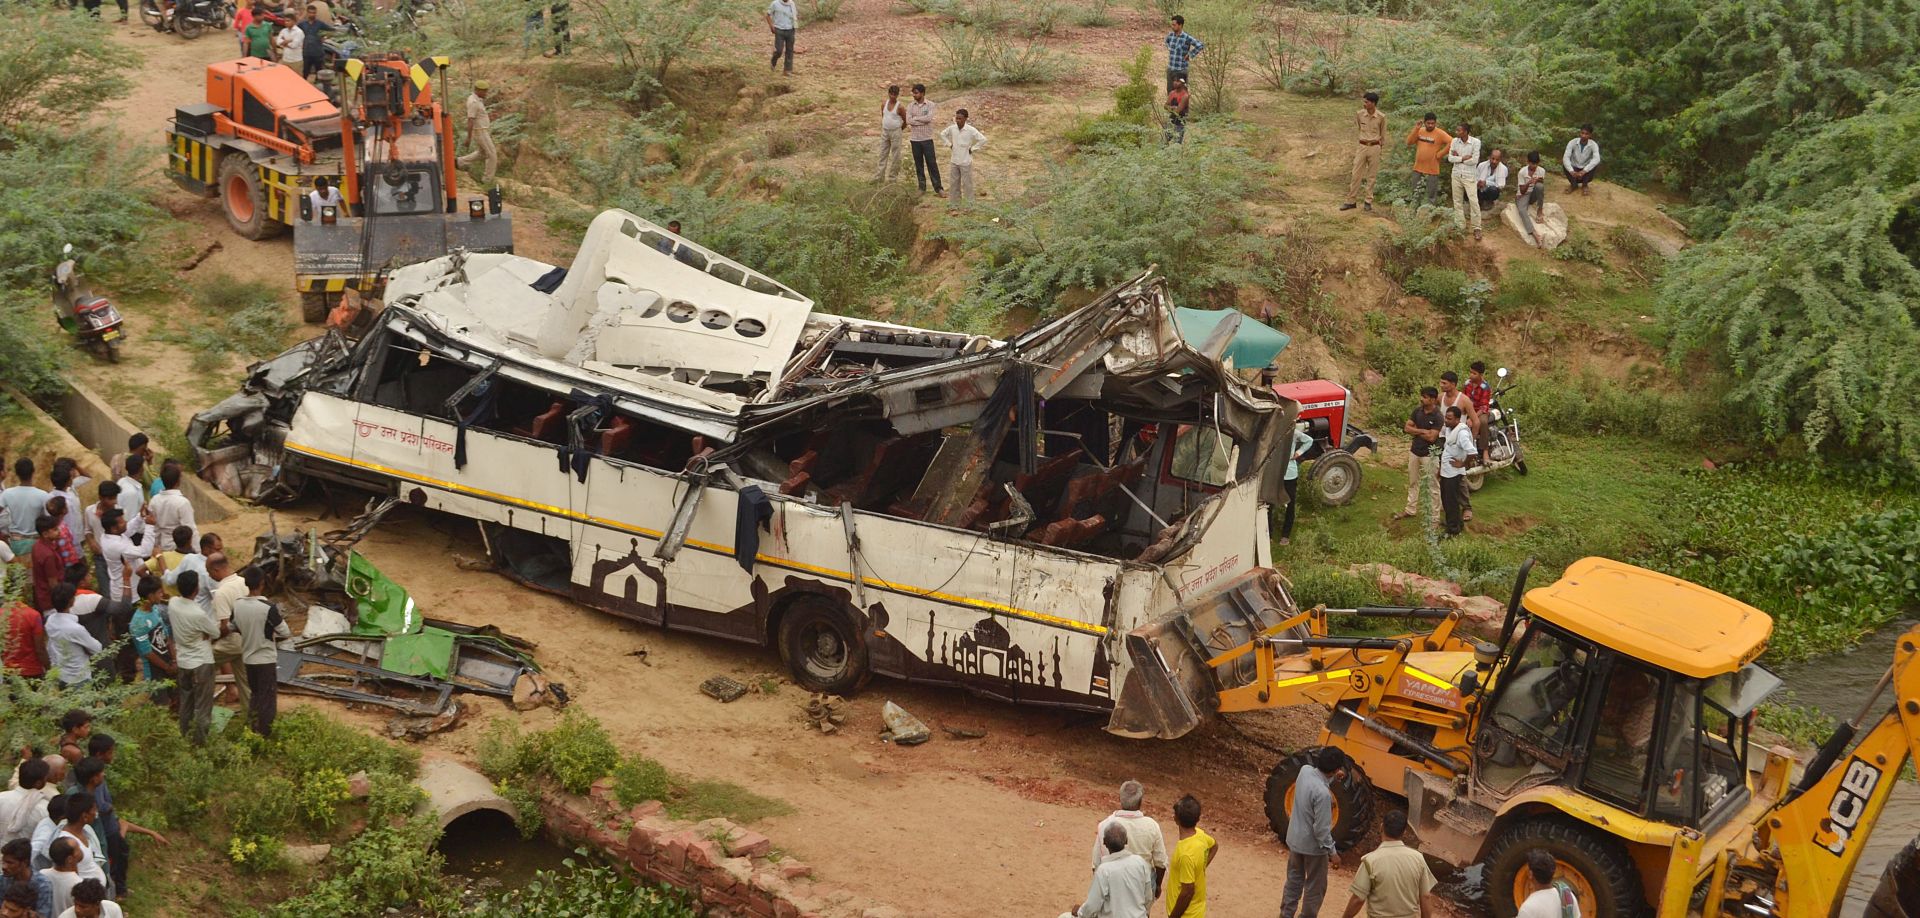 epa07702732 People gather around a damaged bus at the site of an accident where the bus fell into a deep drain on Yamuna Expressway near Agra, Uttar Pradesh, India, 08 July 2019. At least 29 people, including a child and a woman, died in the accident after the bus slipped off and fell into a drain.  EPA/STR